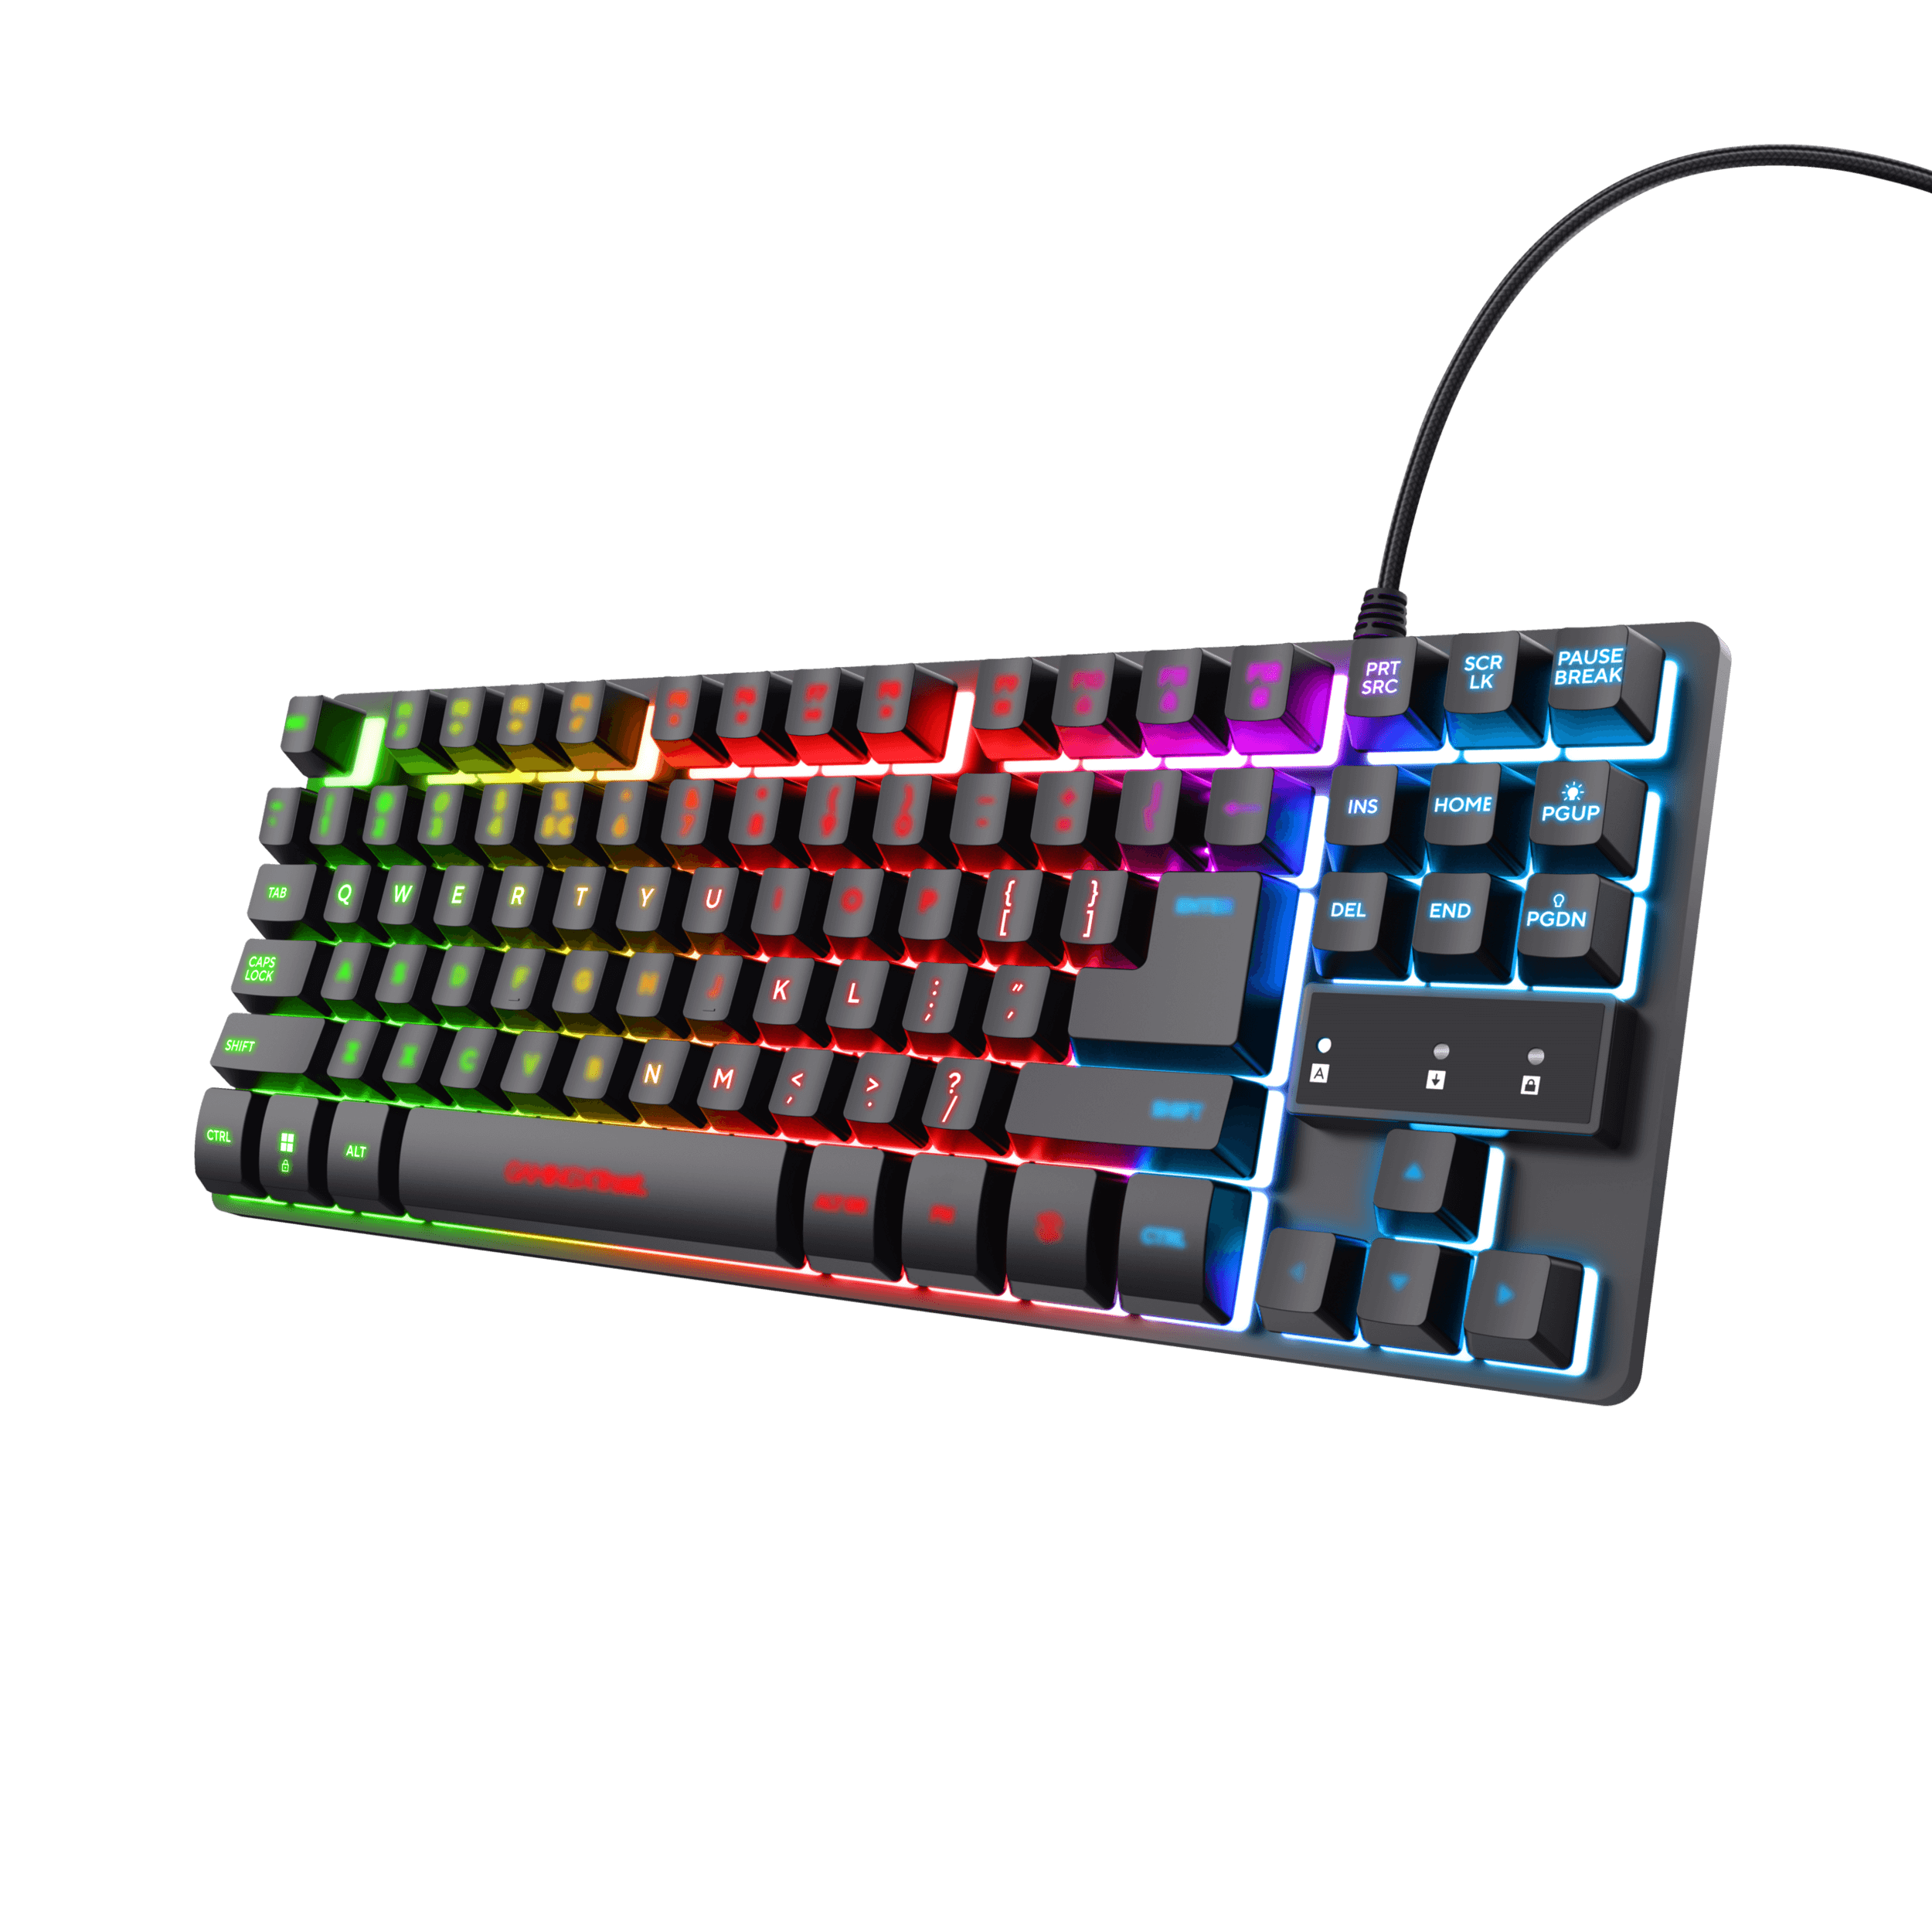 image showing the keyboard with all of the RGB illuminated